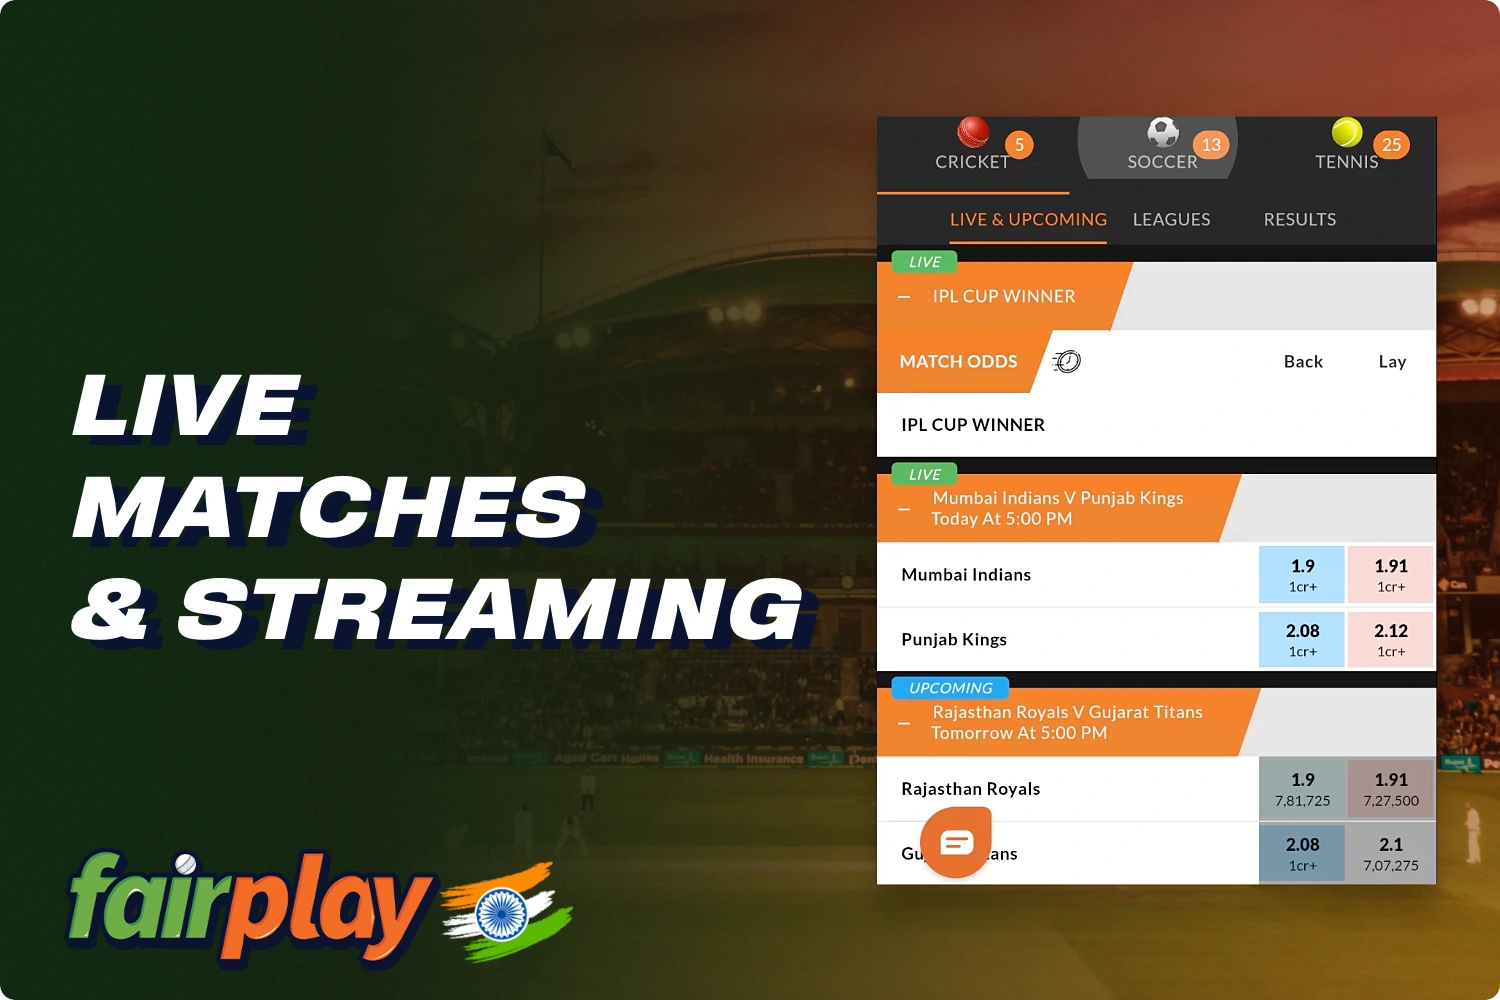 On the Fairplay platform you can not only place live bets but also watch live matches